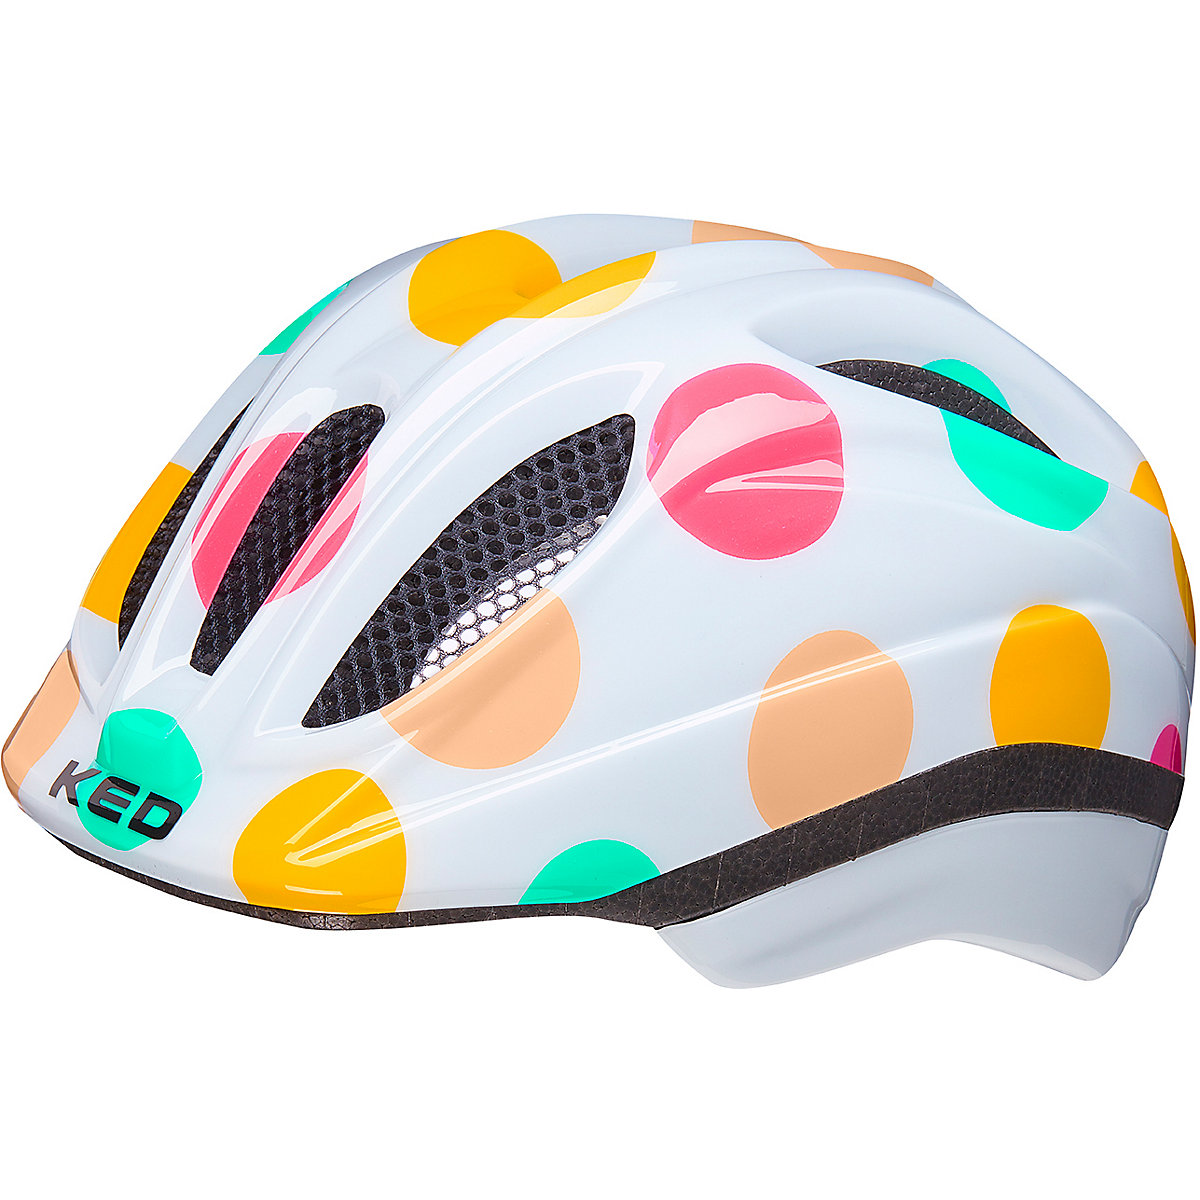 KED Helmsysteme Fahrradhelm Meggy II Trend dots colorful